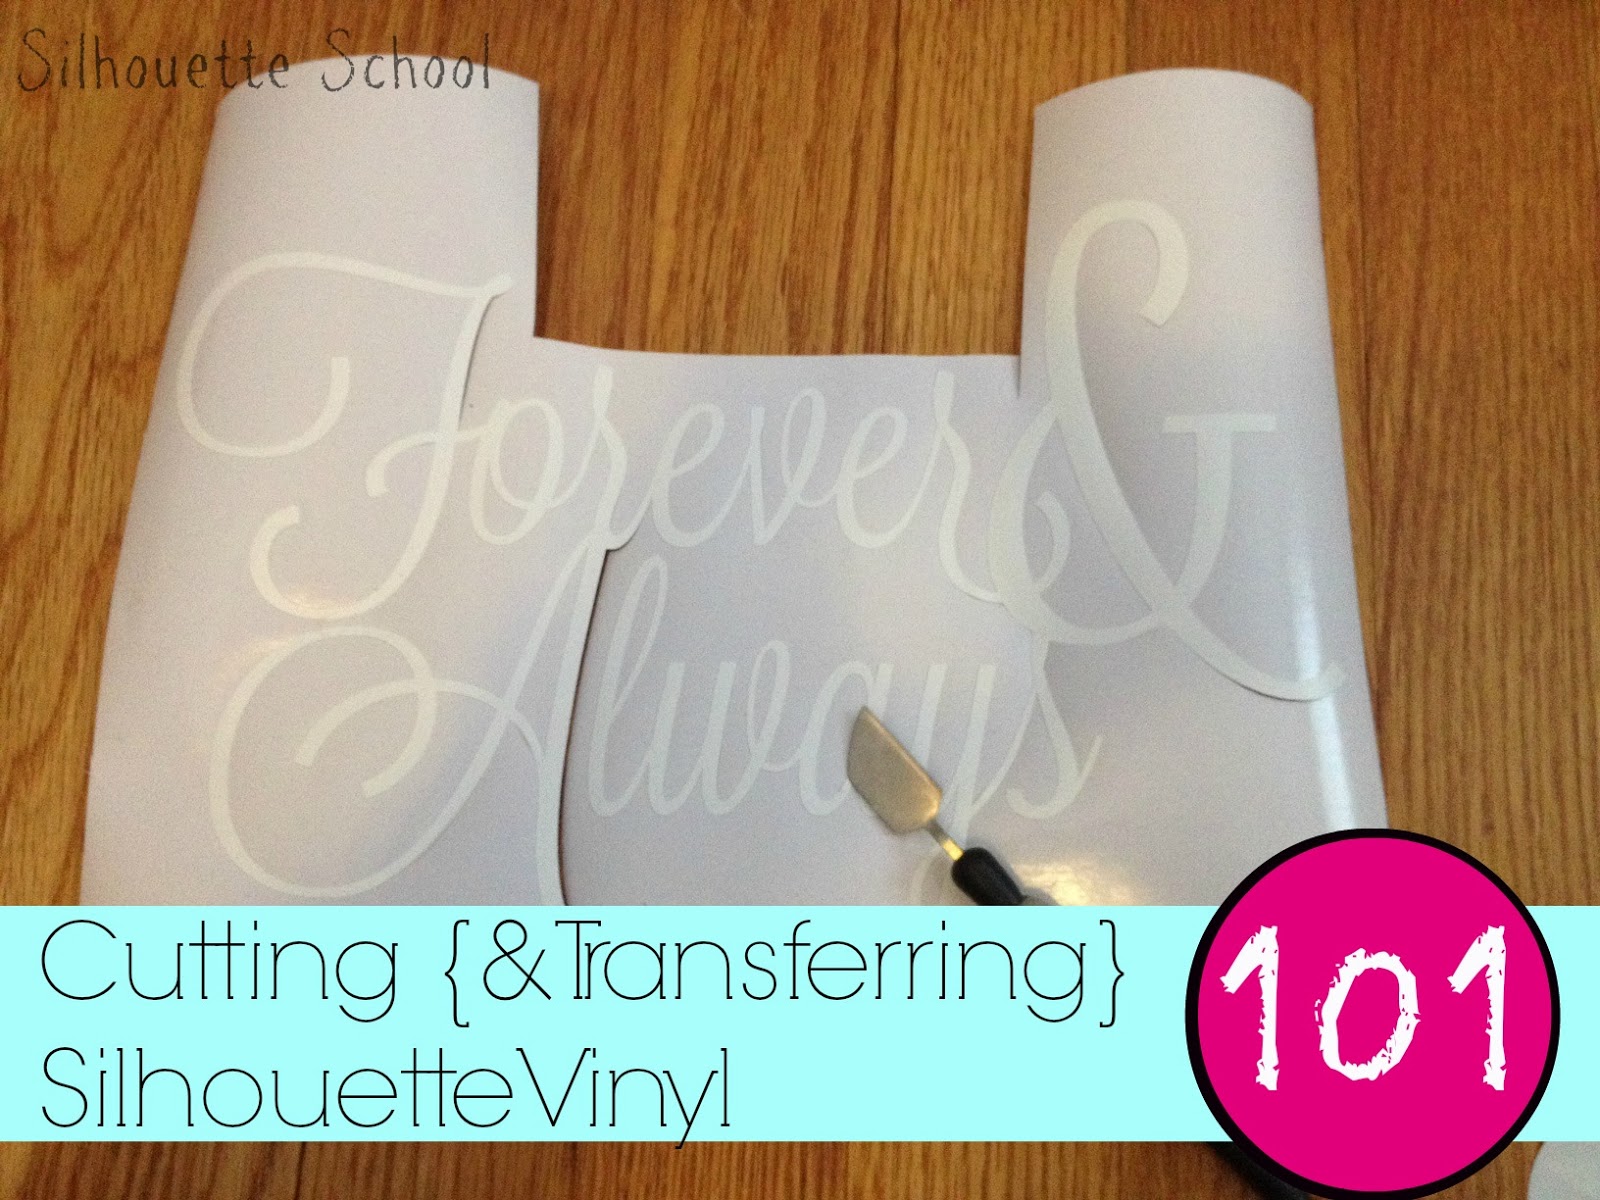 How To Cut Adhesive Vinyl With Silhouette: Tips From An Expert